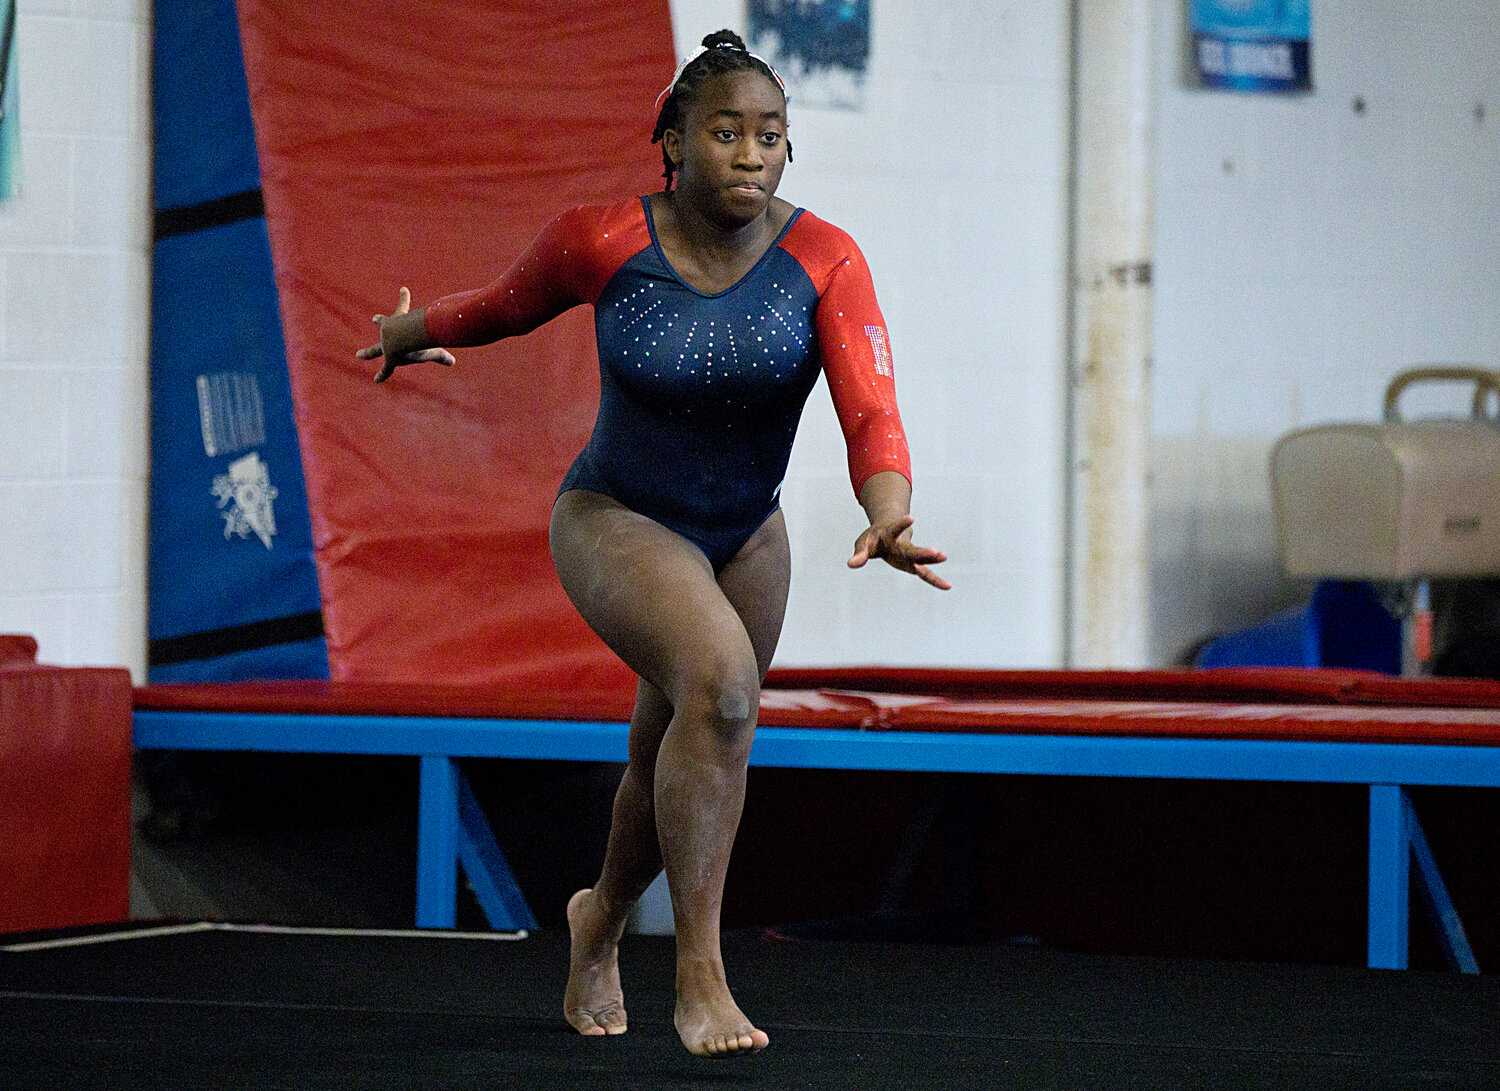 Roshana Webster completes a tumbling pass while performing her floor routine.